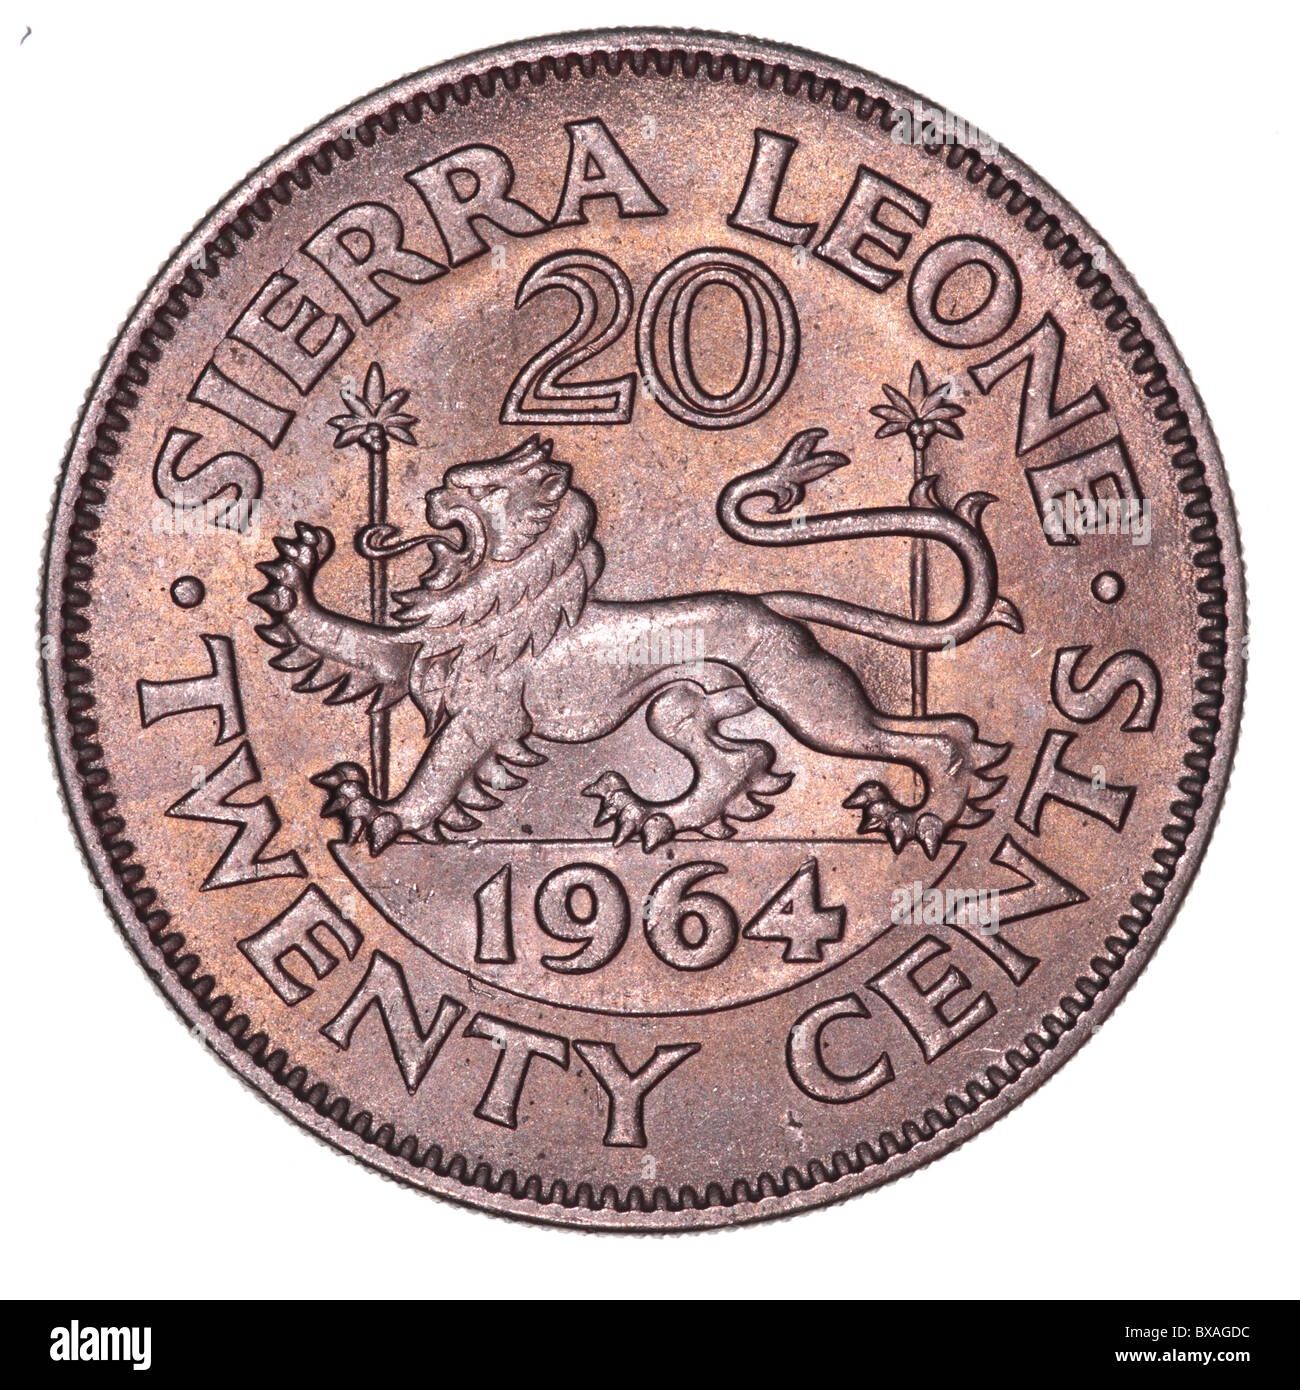 Sierra Leone 20 cent coin (1964) reverse featuring a lion passant Stock Photo